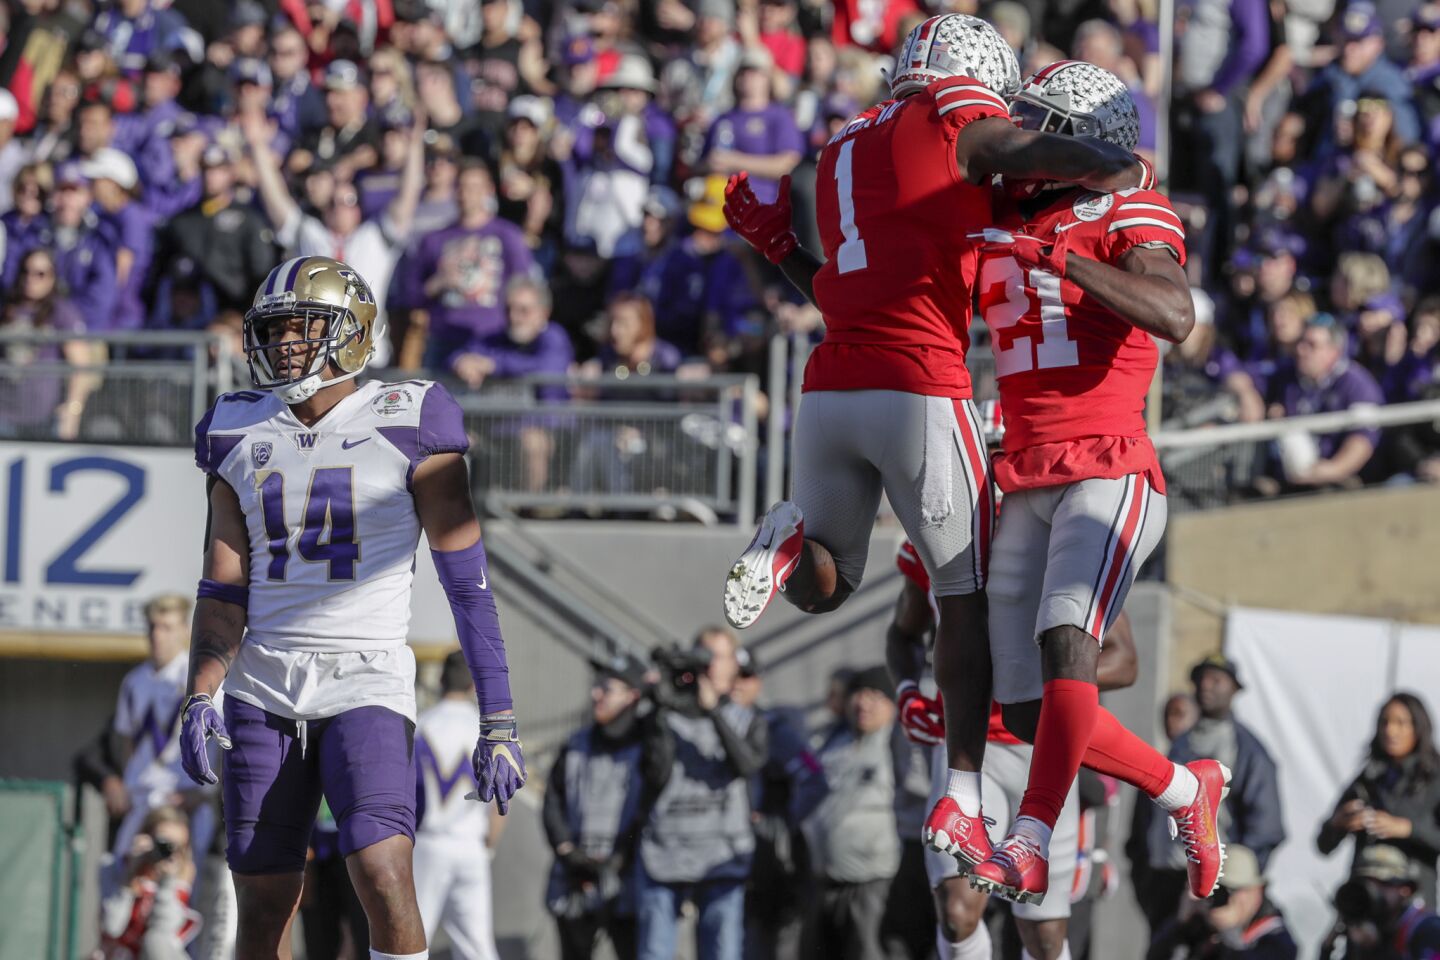 Ohio State receiver Parris Campbell, right, celebrates with treammate Johnnie Dixon after catching a touchdoen as Washington defensive back JoJo McIntosh looks on in the first quarter of the Rose Bowl.